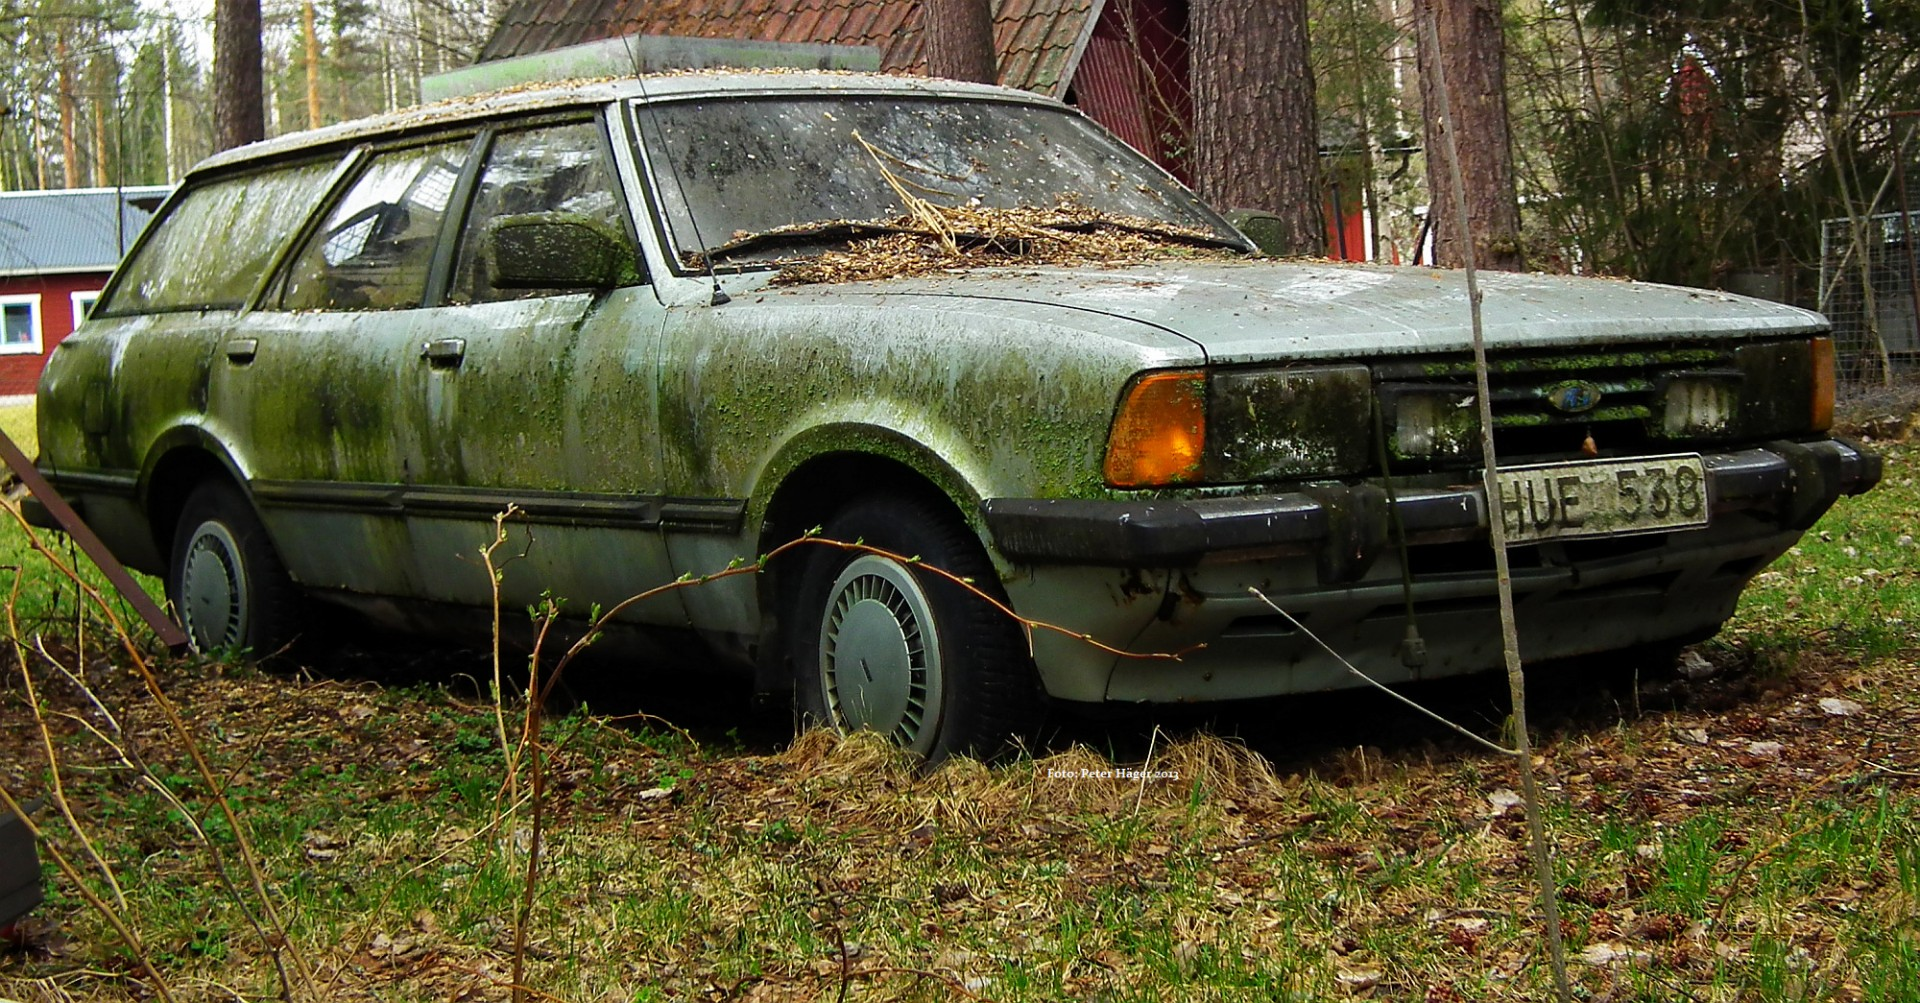 A junk car in South Ozone Park, NY, ready to be sold for cash